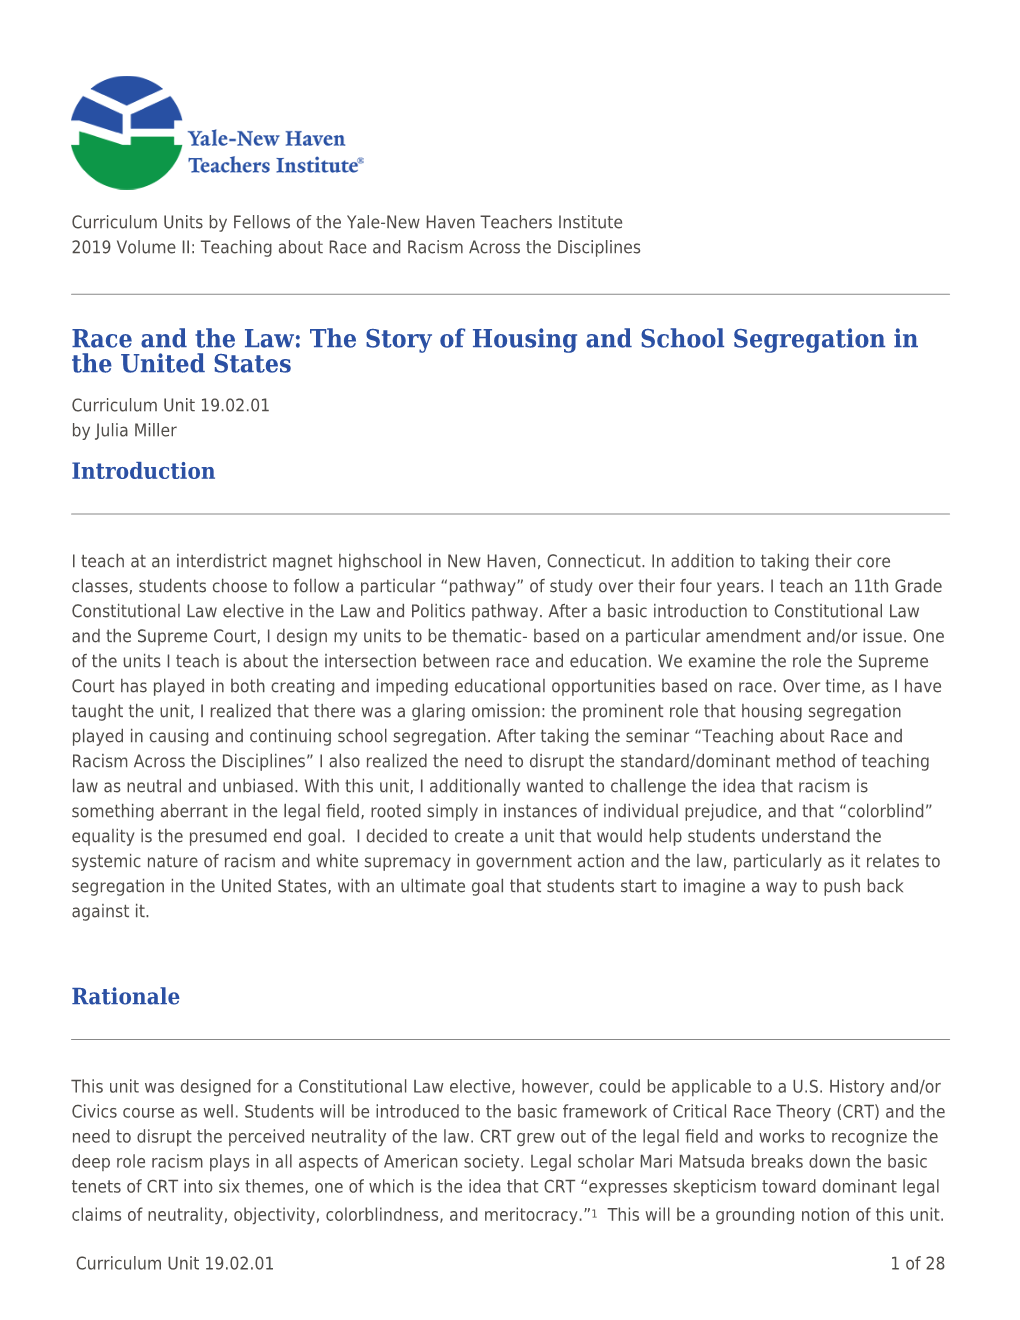 Race and the Law: the Story of Housing and School Segregation in the United States